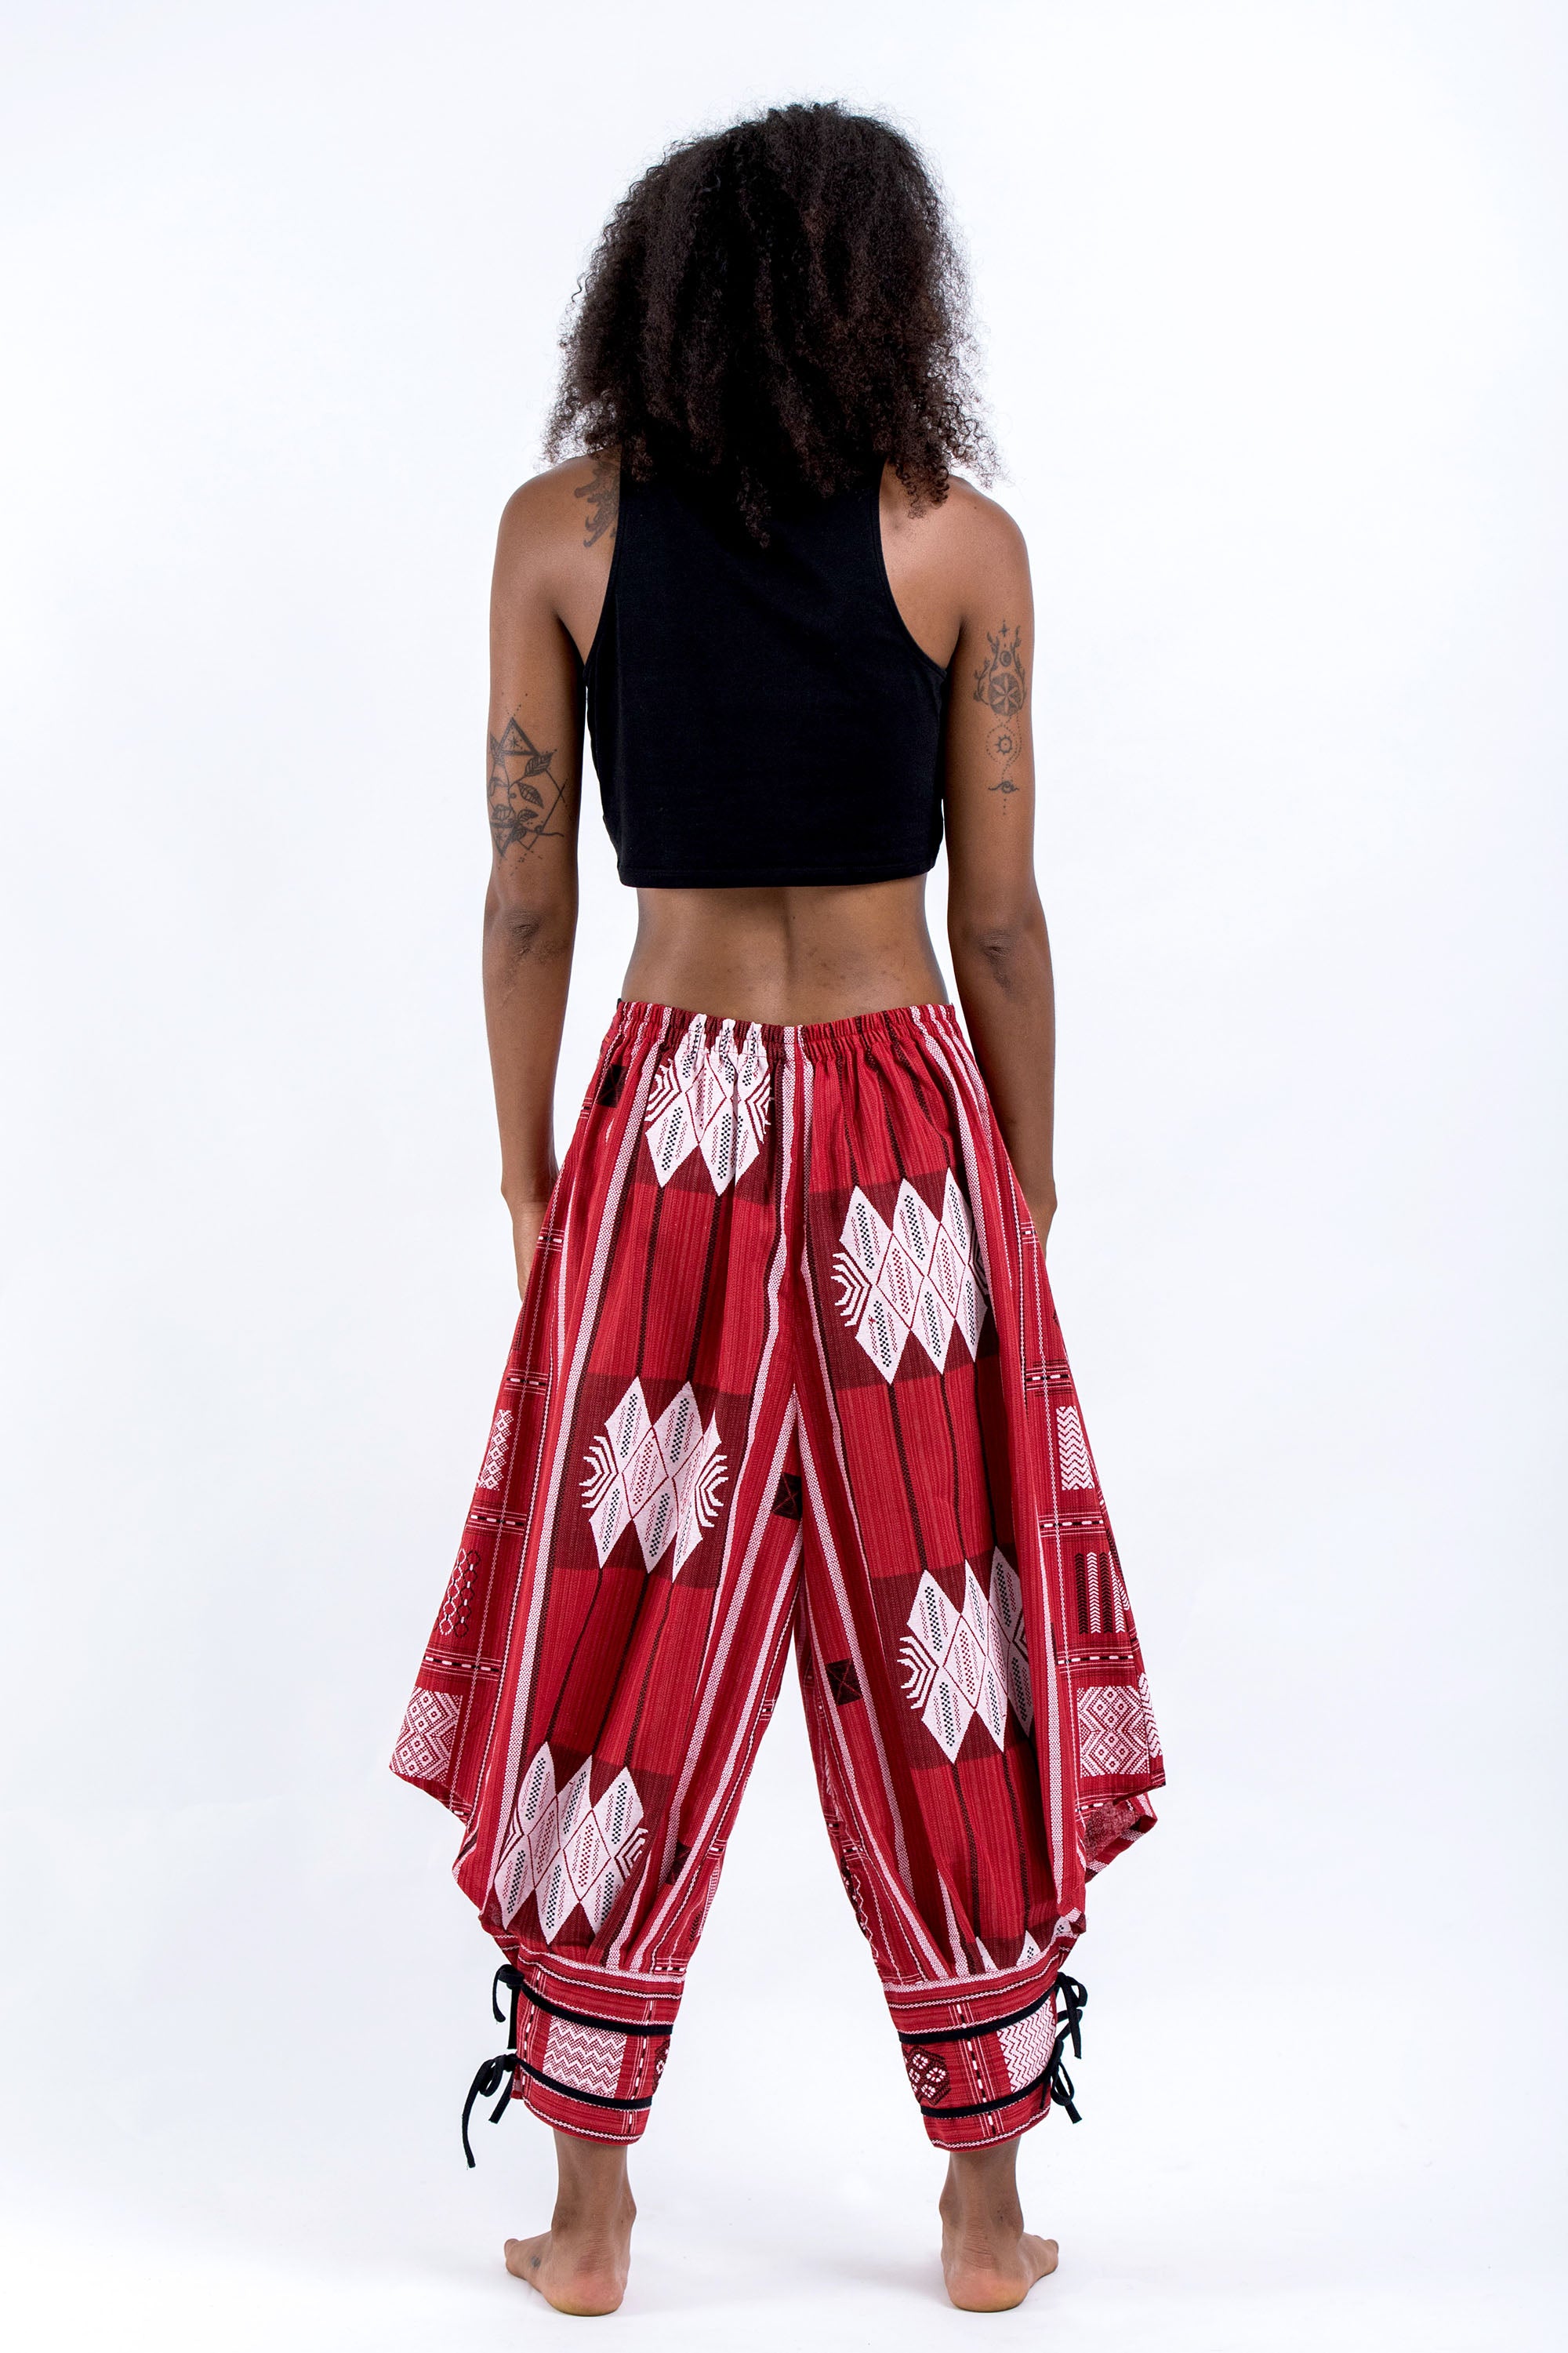 Woven Prints Thai Hill Tribe Fabric Women's Harem Pants with Ankle Str